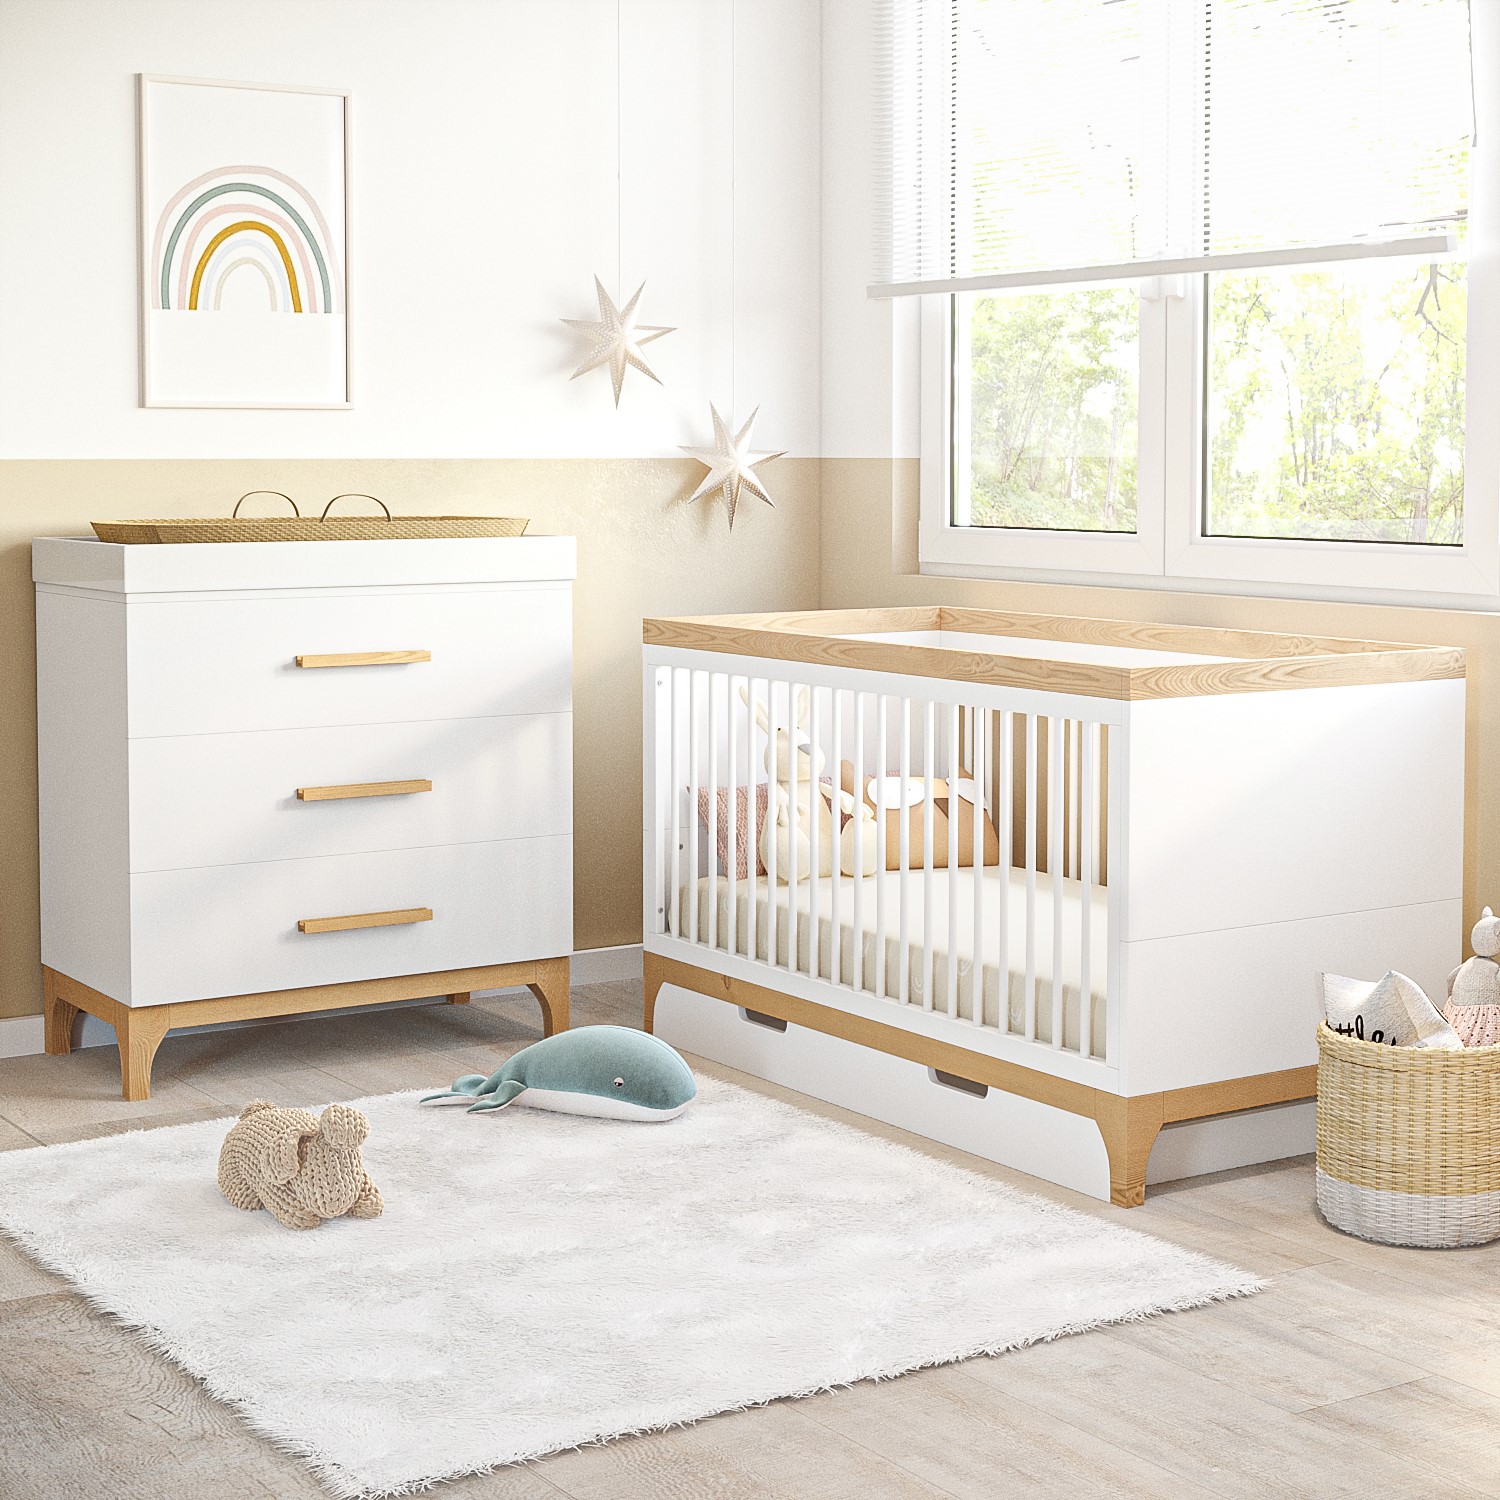 Photo of 2 piece nursery furniture set with cot bed and changing table in white - rue